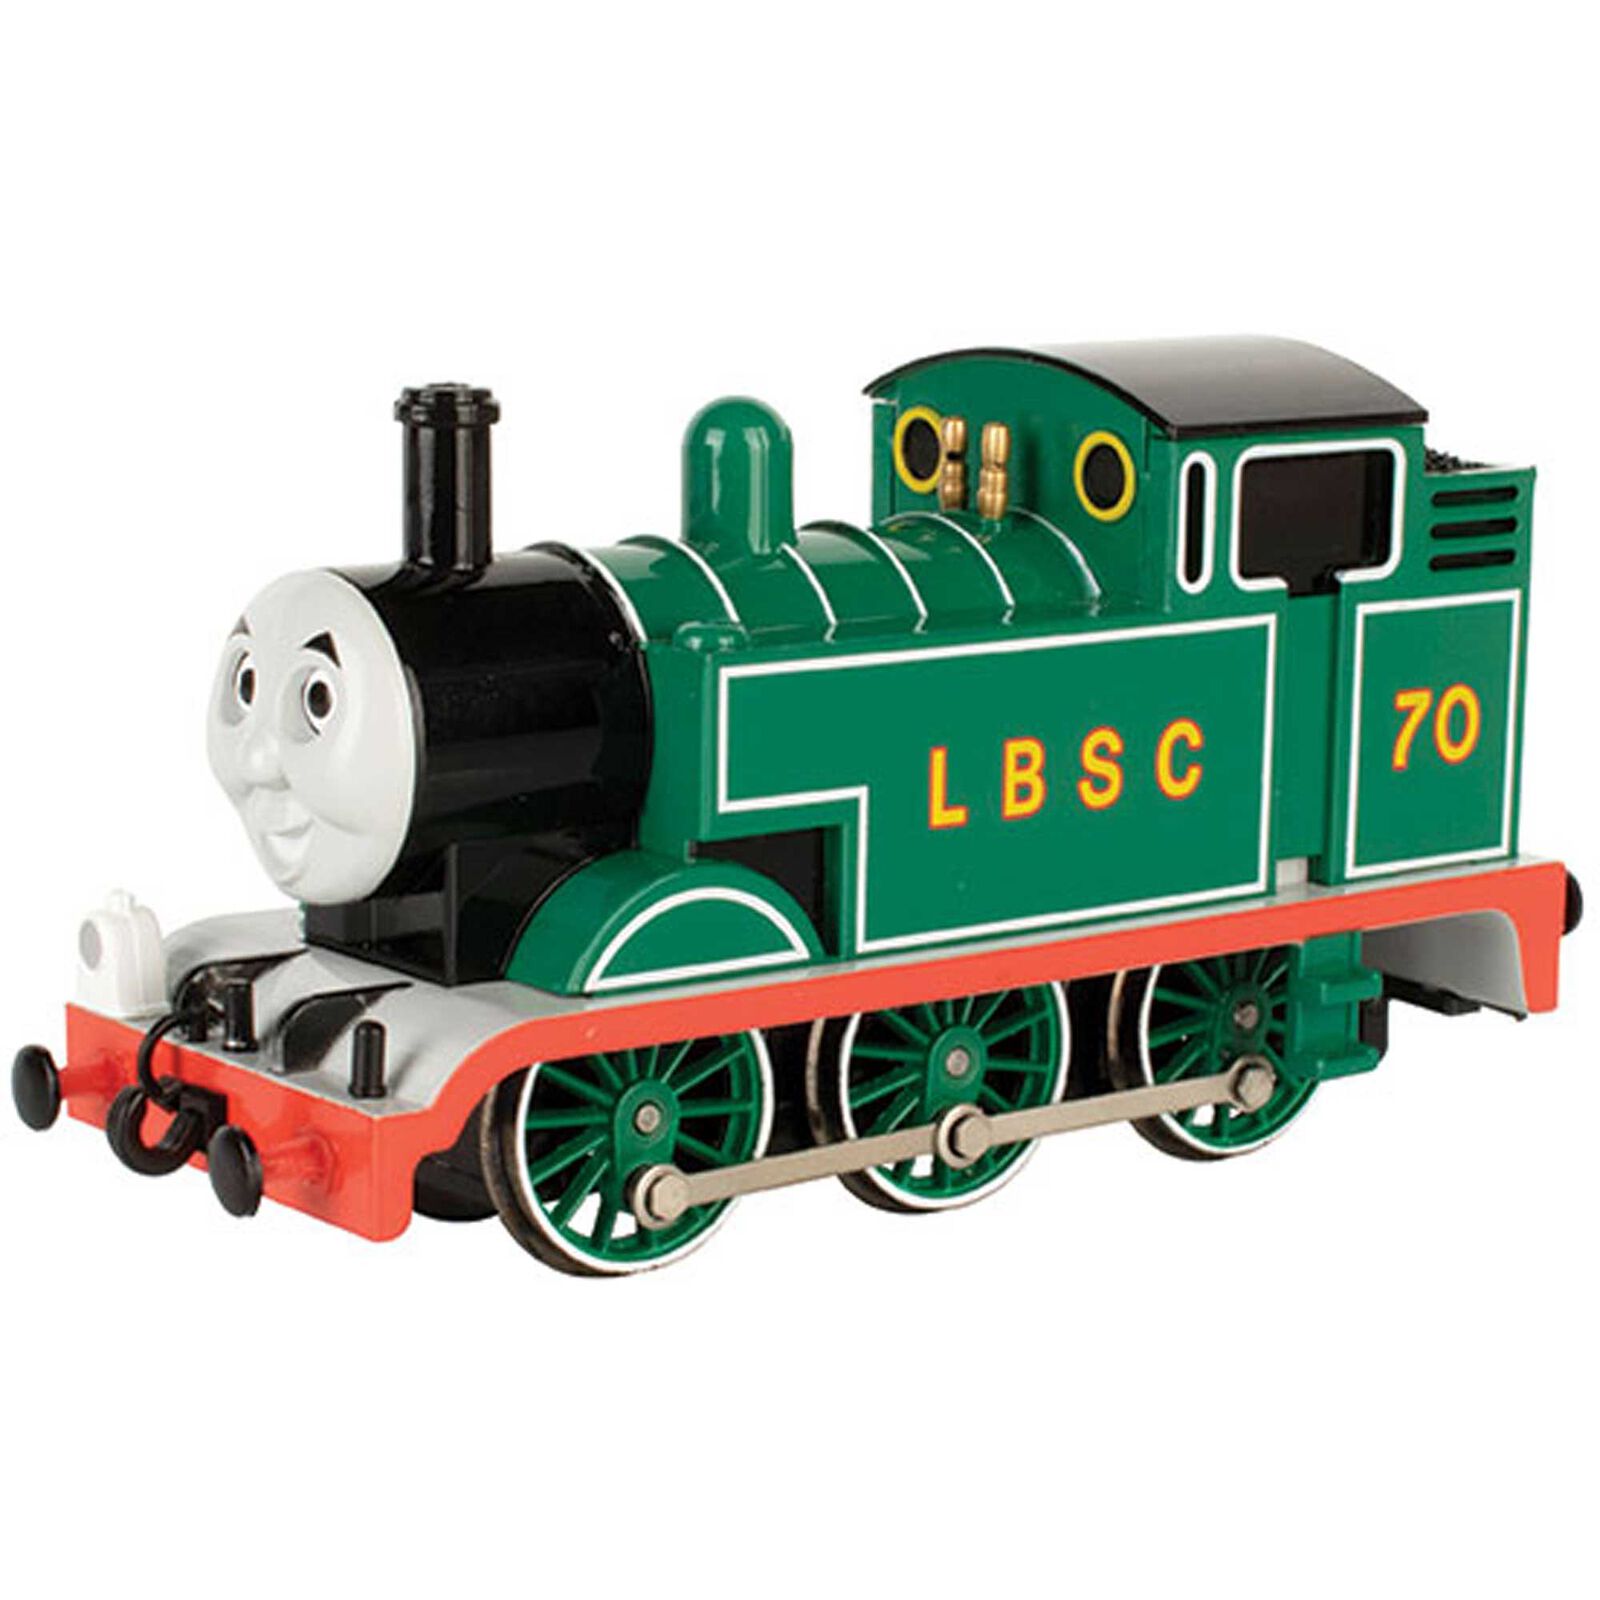 Thomas the Tank Engine - LBSC 70 with Moving Eyes